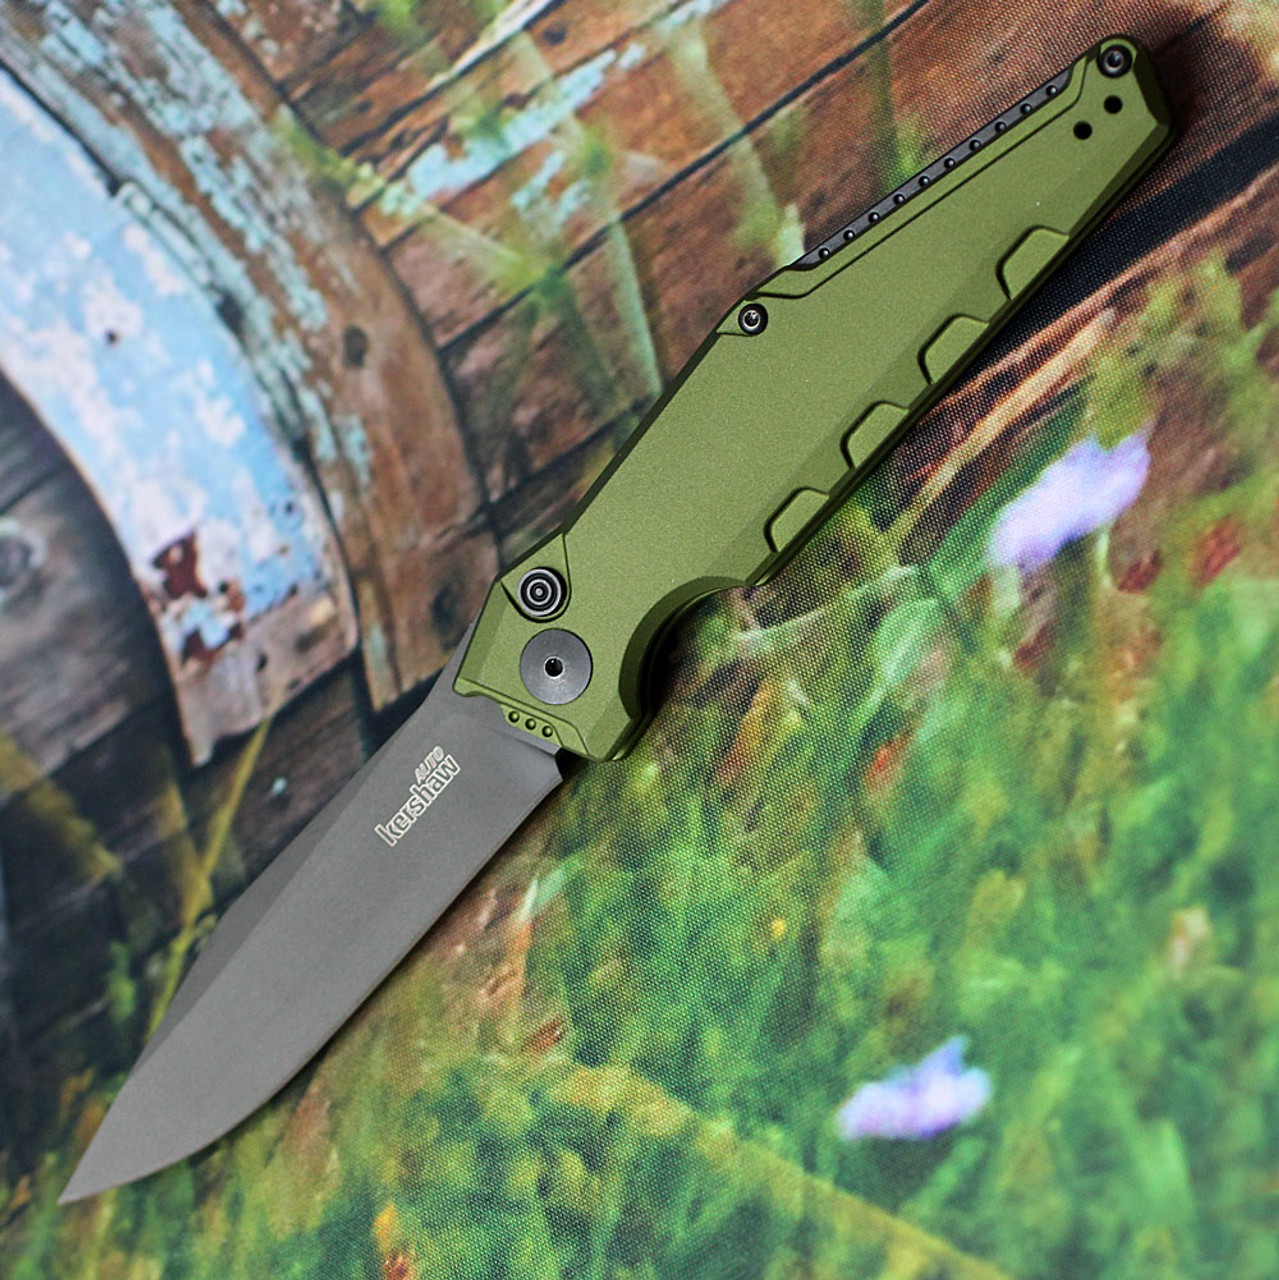 Kershaw Launch 7 Automatic Knife (7900OLBLK)- 3.75" Black CPM-154 Drop Point Blade, OD Green Aluminum Handle